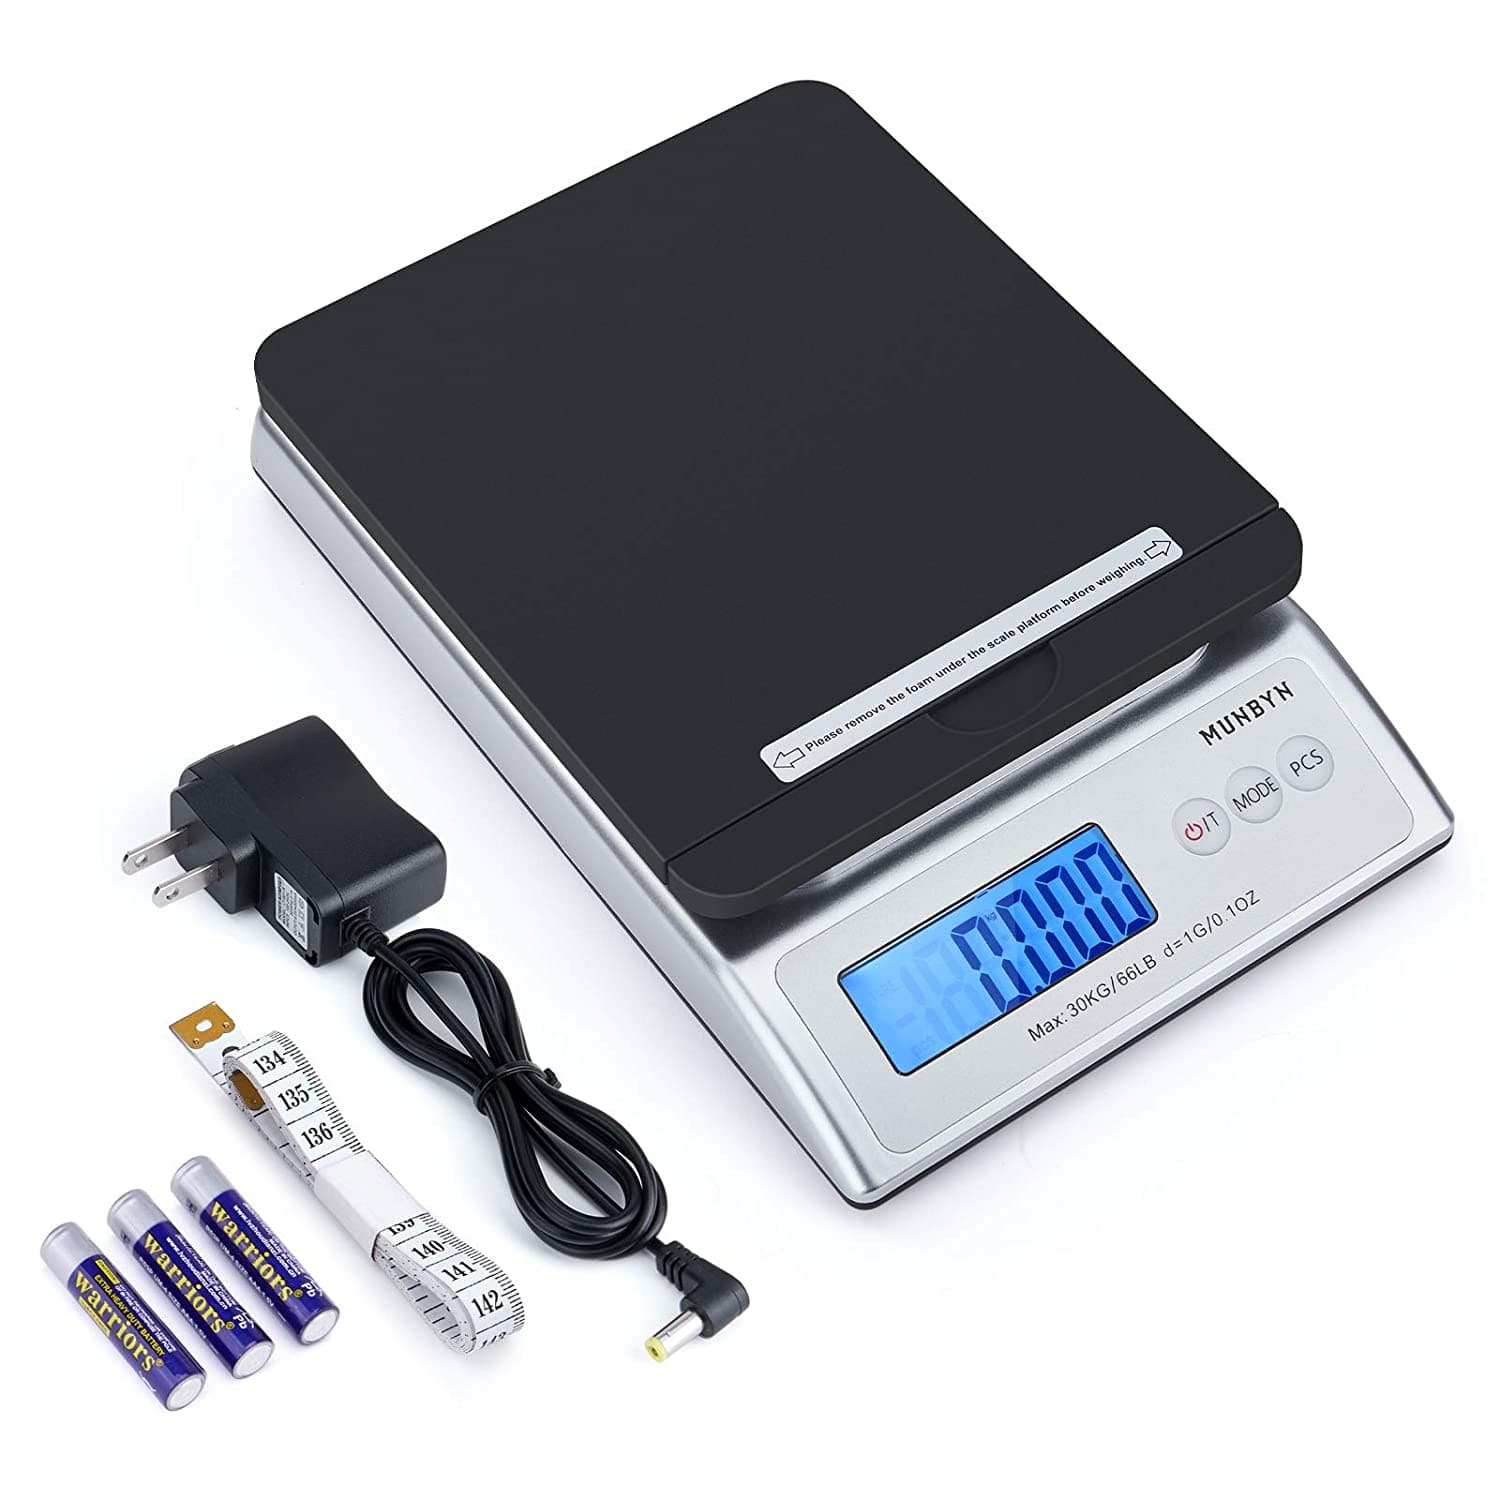 MUNBYN's black digital postal scale comes with a charging head, three batteries, and a tape measure.